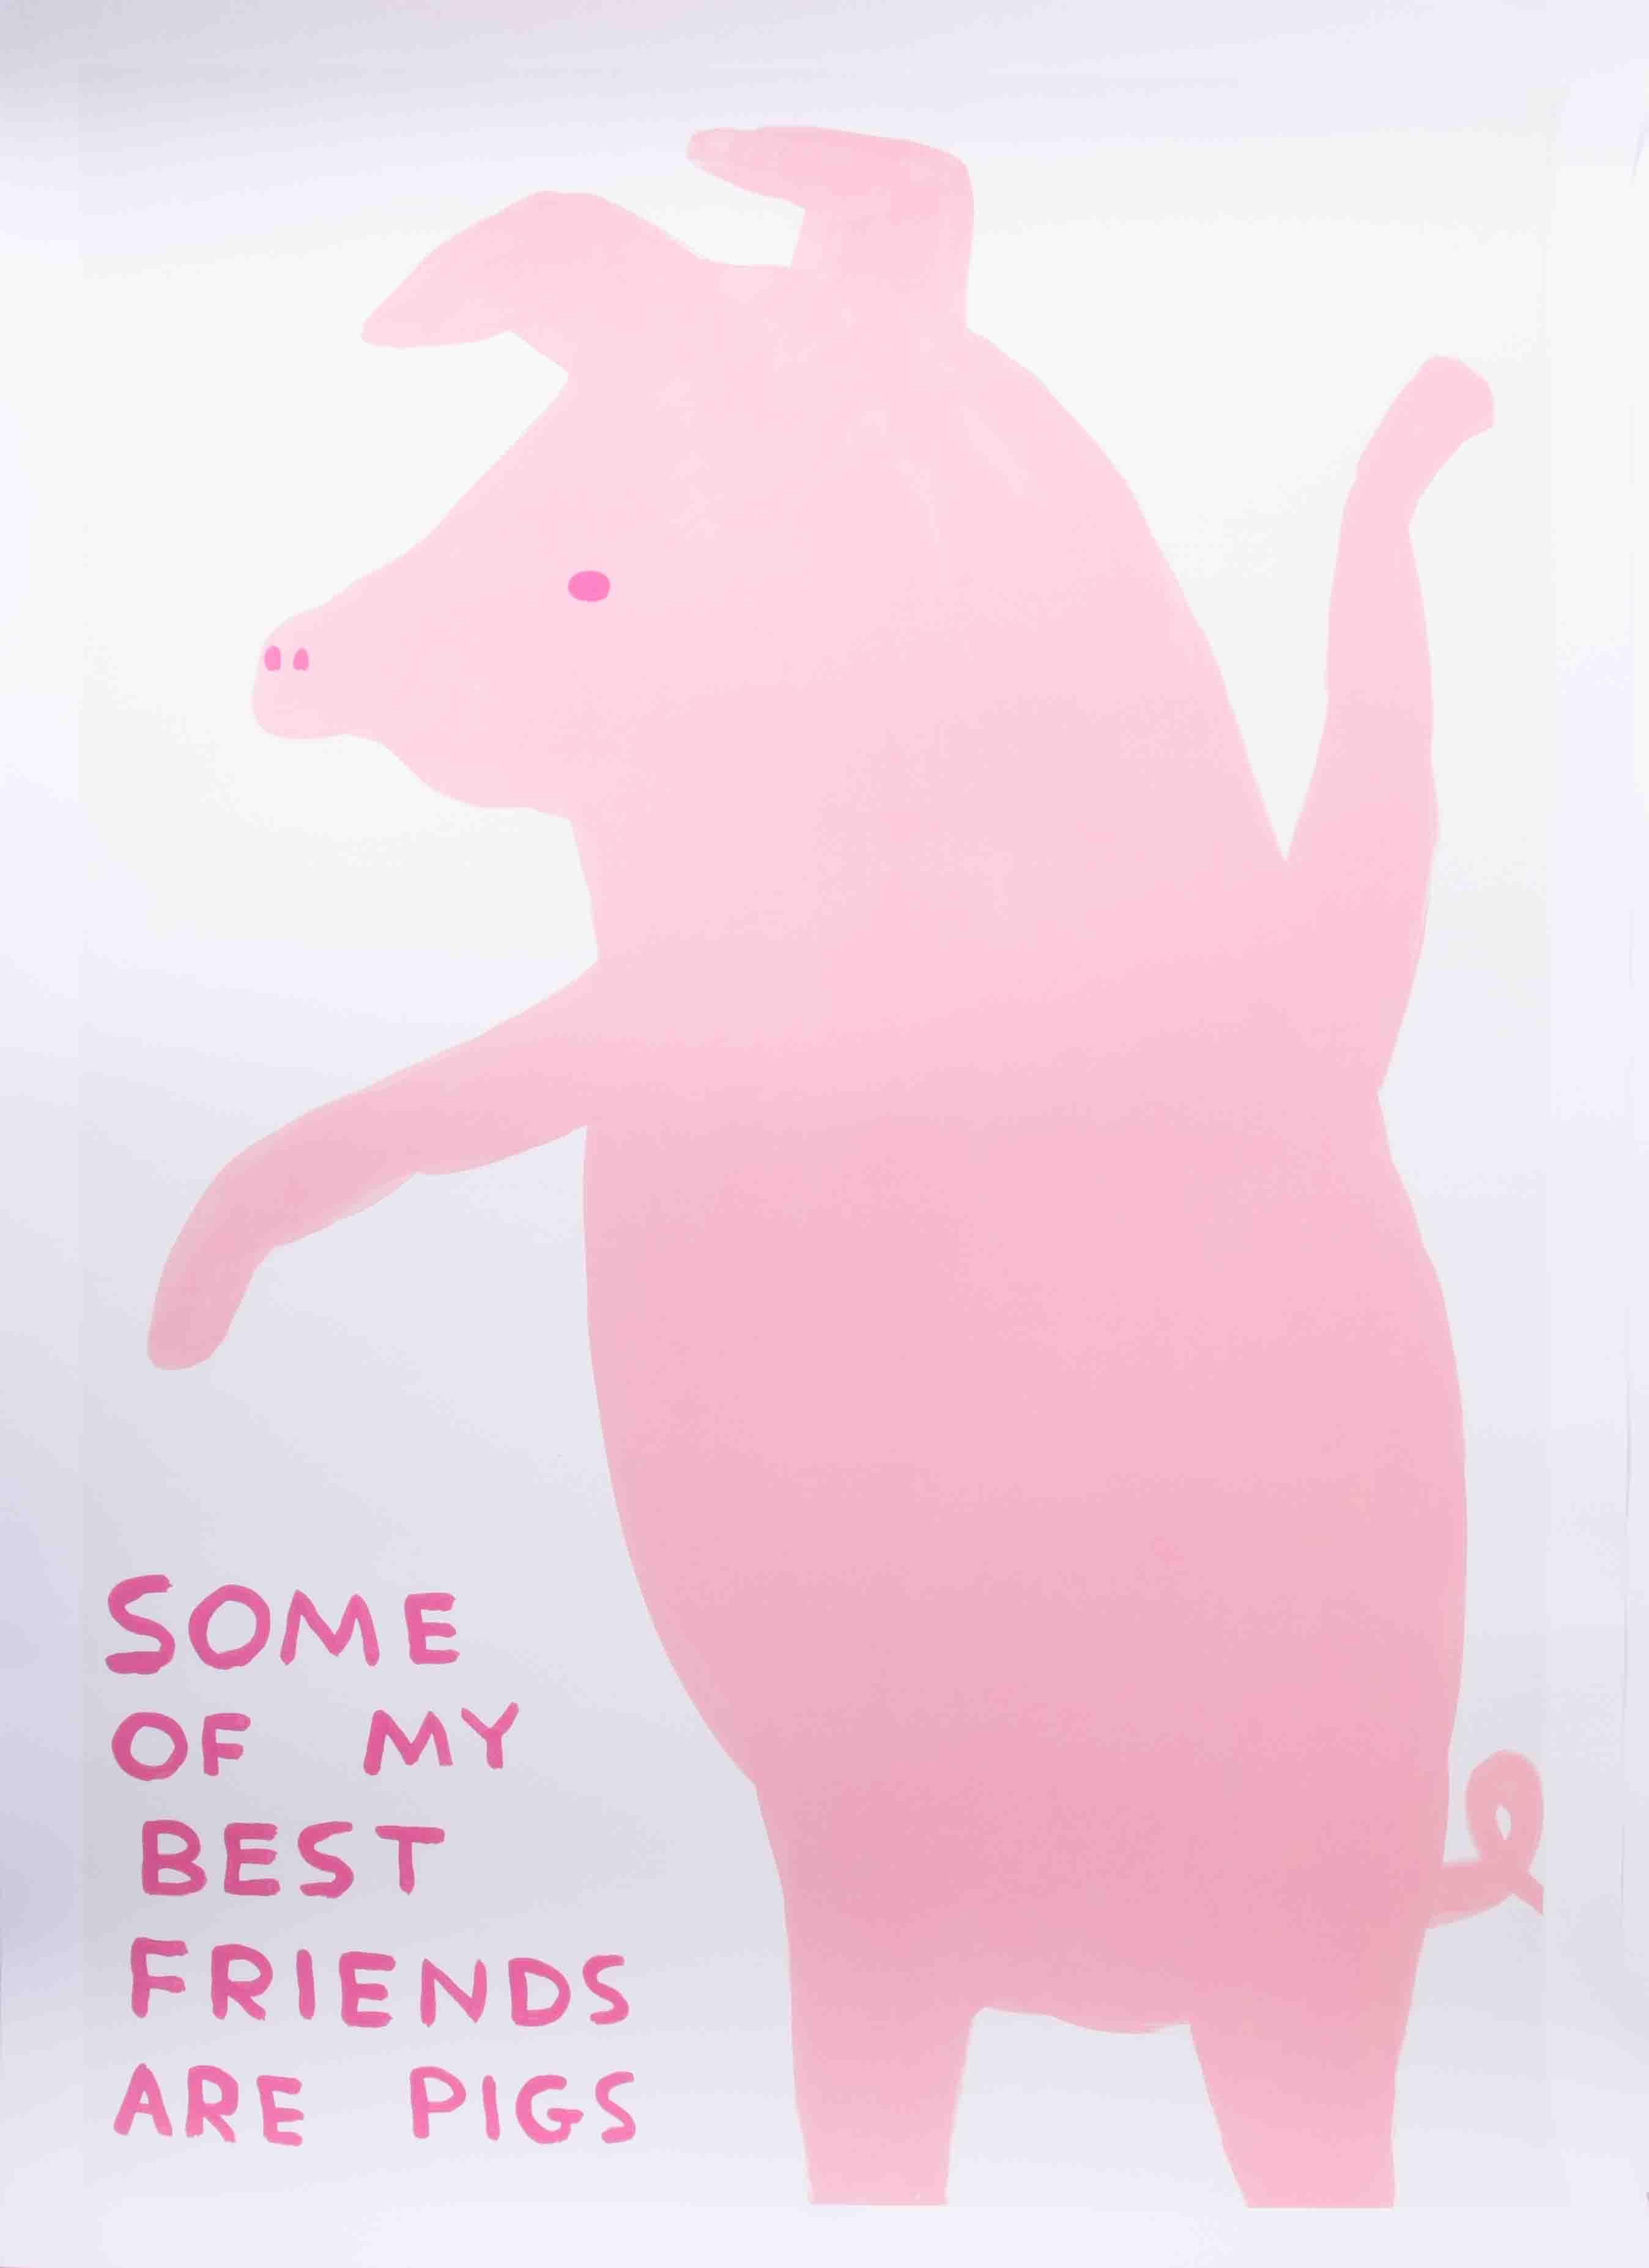 David Shrigley (b.1968), poster 'Some Of My Best Friends Are Pigs', unsigned exhibition poster, 80cm